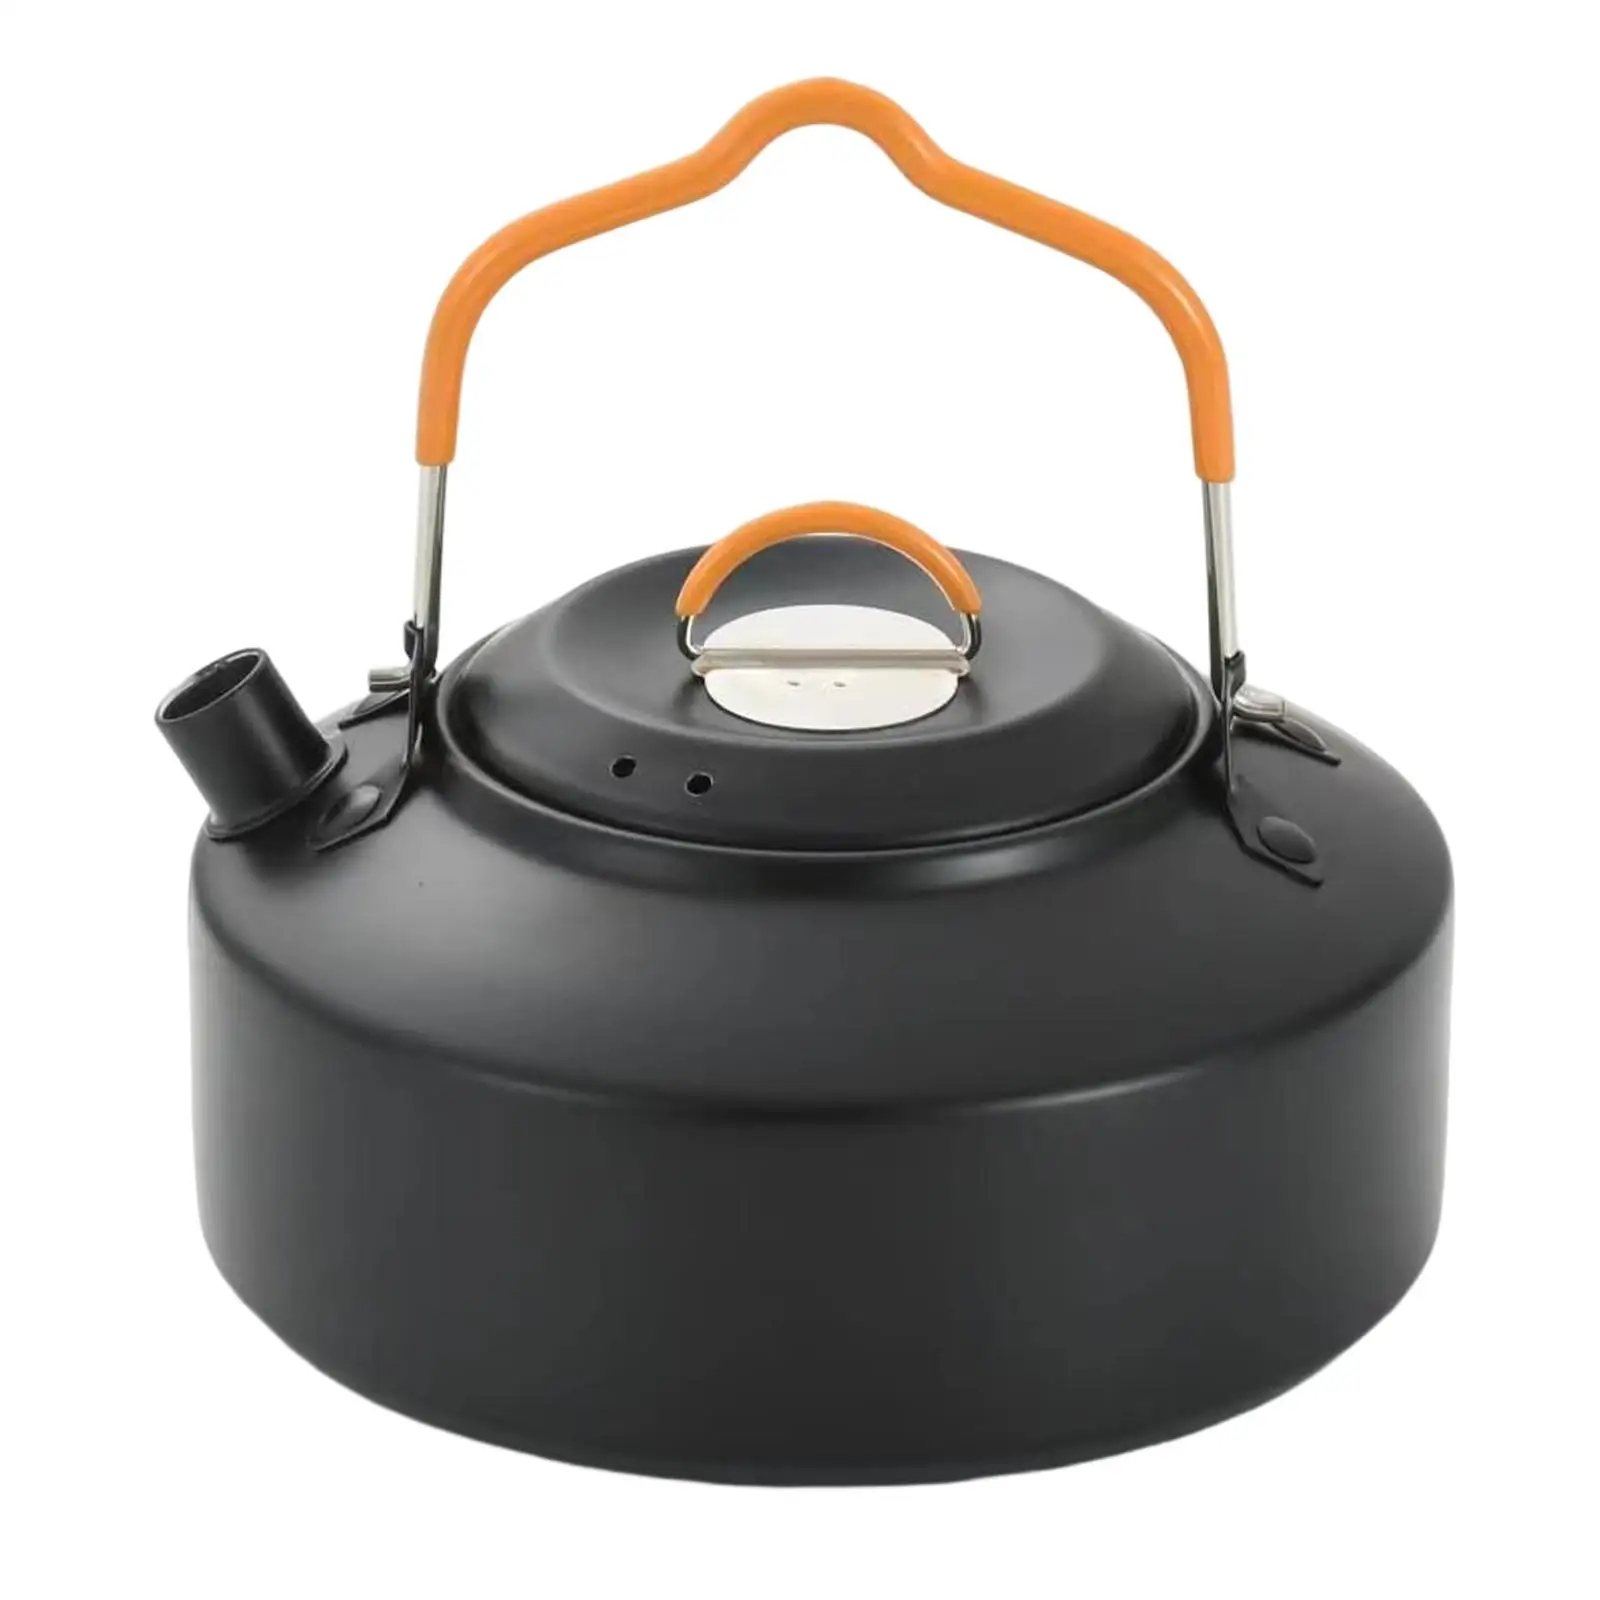 Portable Camp Tea Coffee Kettle Kettle with Handle Campfire Cookware Camping